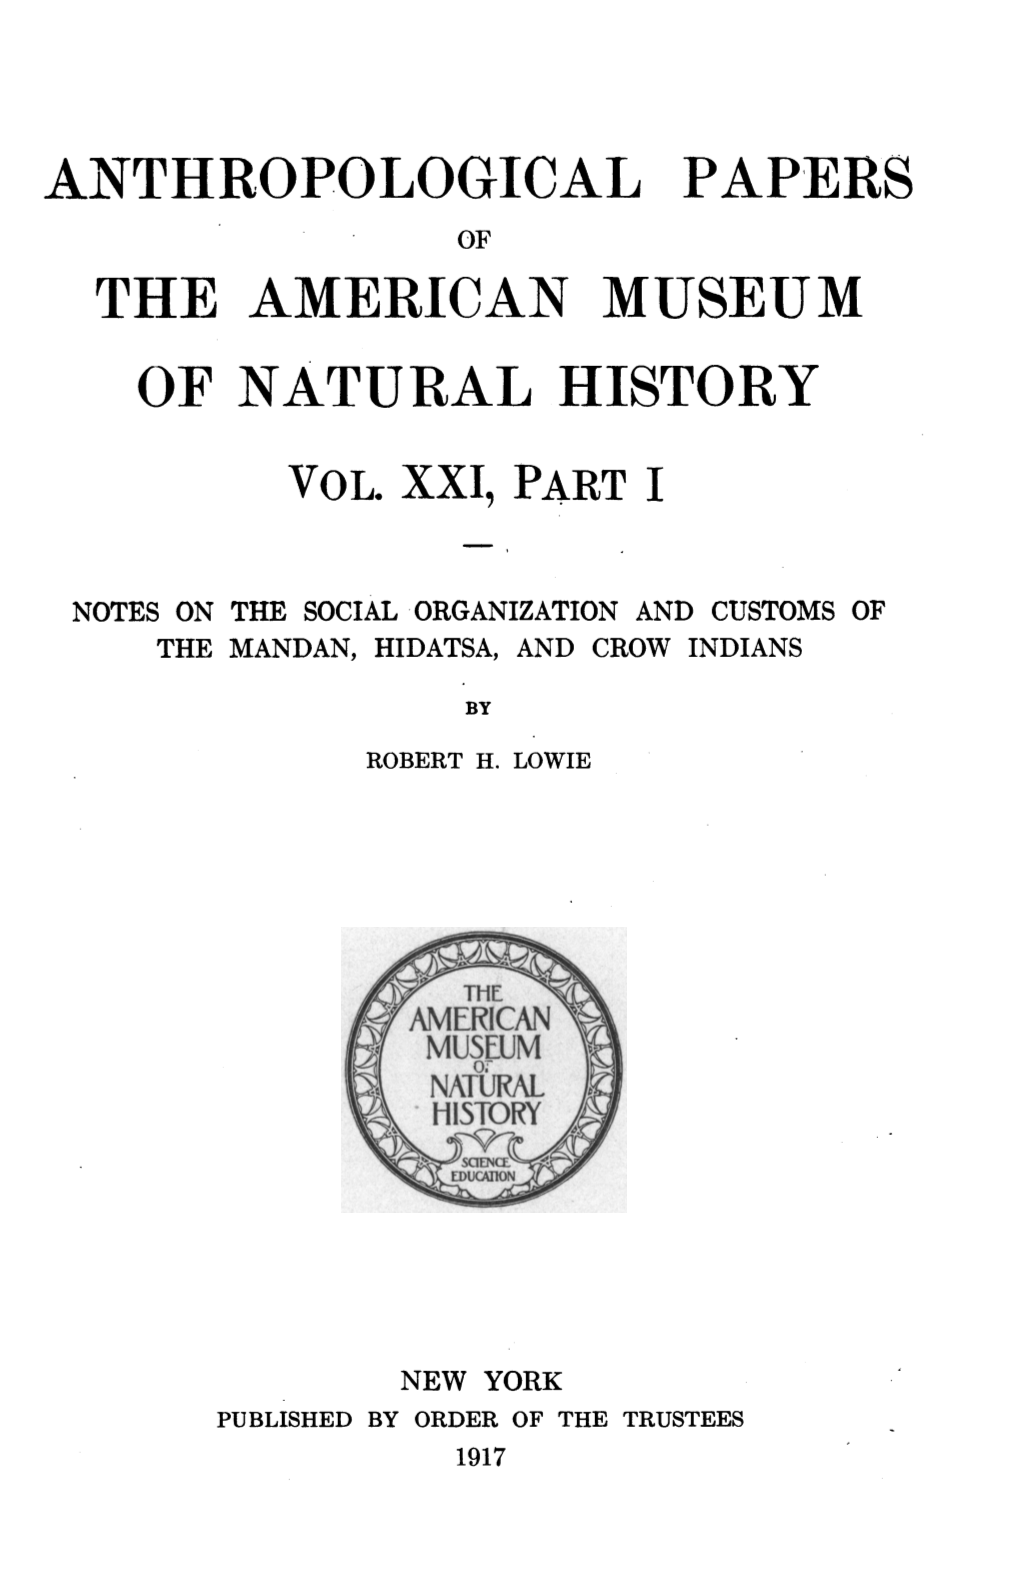 Anthropological Papers of the American Museum of Natural History Vol